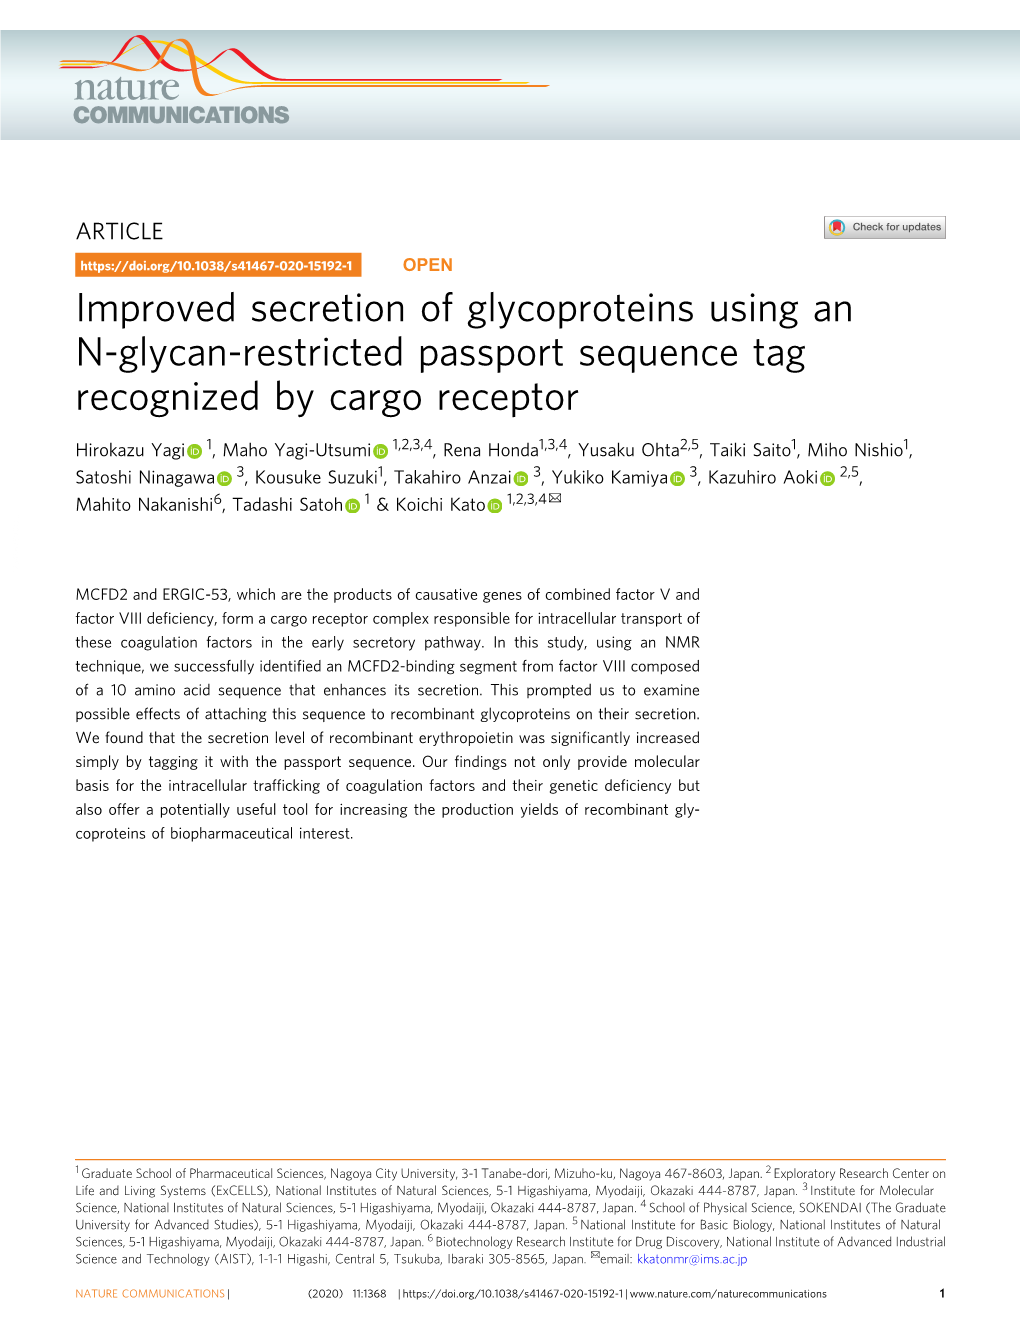 Improved Secretion of Glycoproteins Using an N-Glycan-Restricted Passport Sequence Tag Recognized by Cargo Receptor